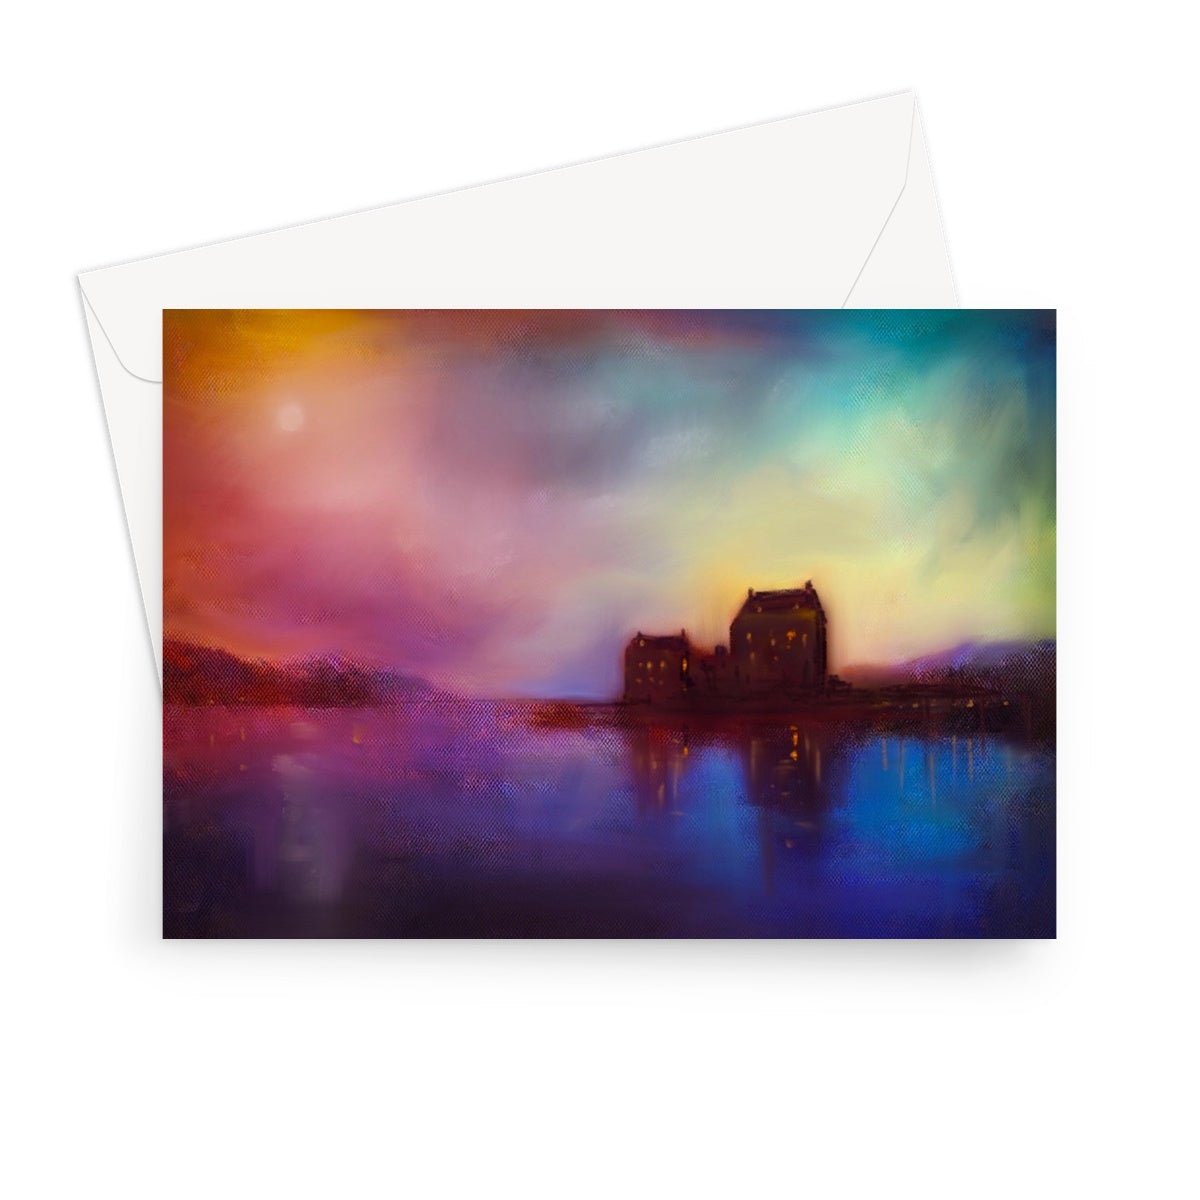 Eilean Donan Castle Sunset Art Gifts Greeting Card-Greetings Cards-Scottish Castles Art Gallery-7"x5"-10 Cards-Paintings, Prints, Homeware, Art Gifts From Scotland By Scottish Artist Kevin Hunter